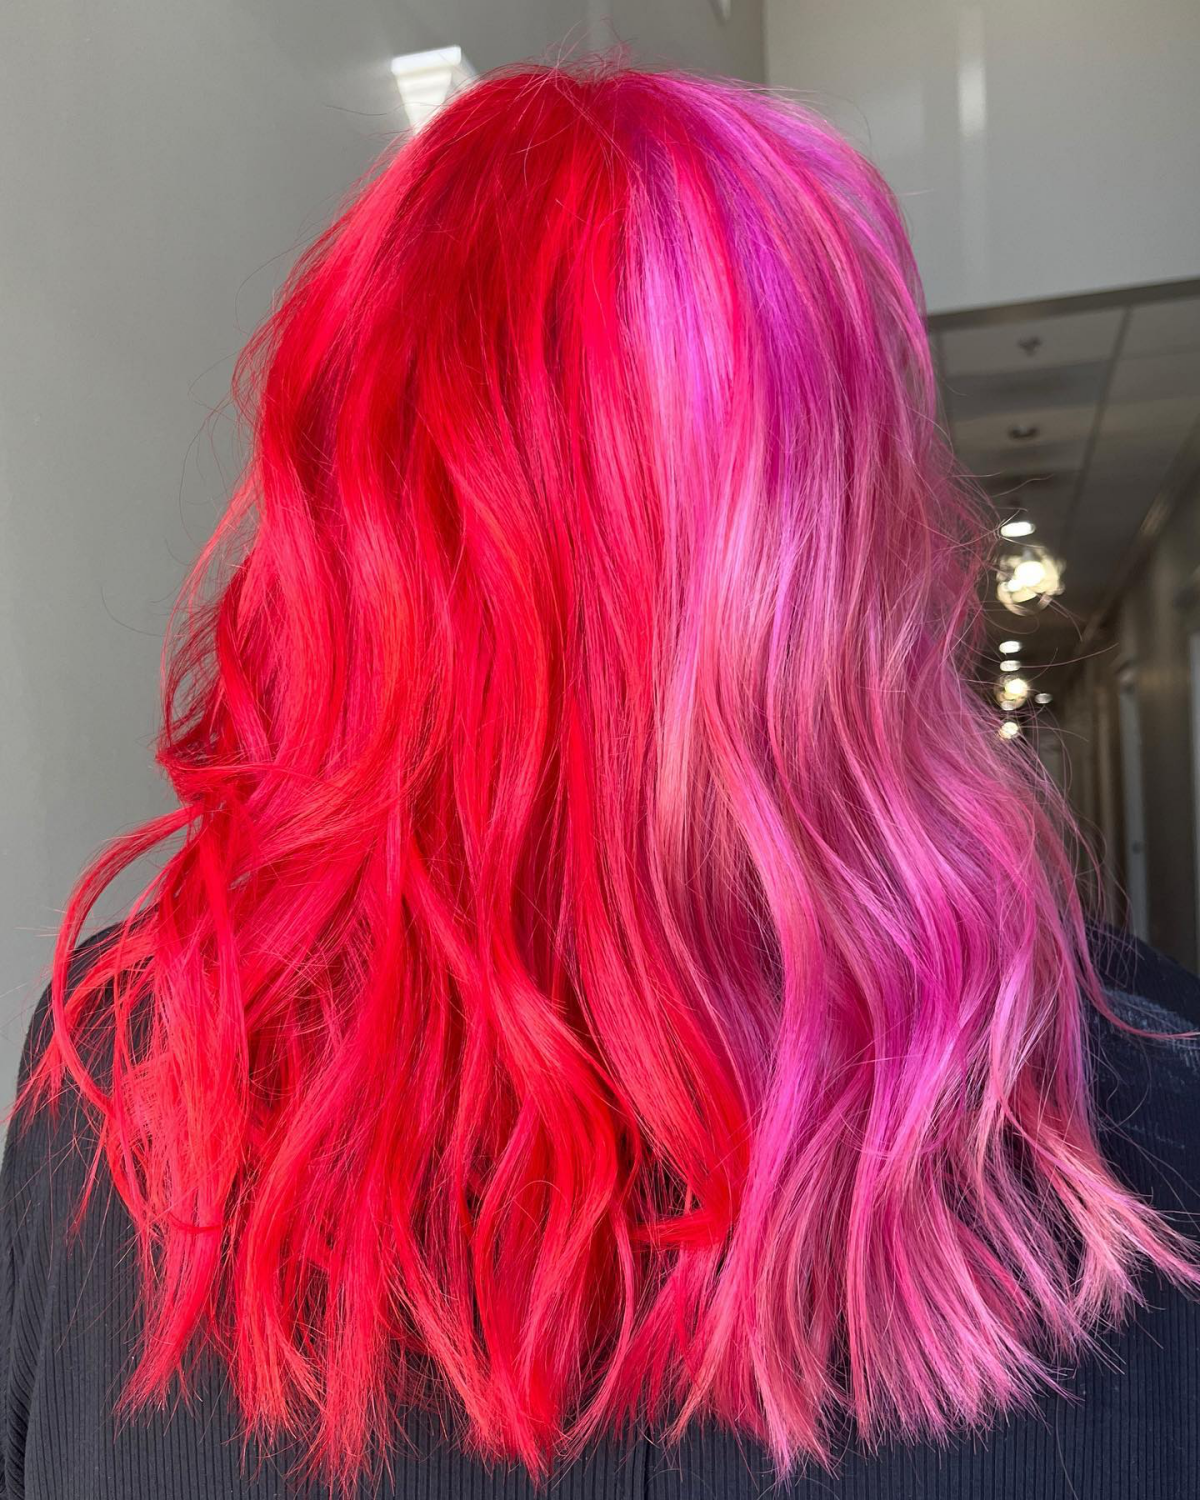 pink and red split hairstyle